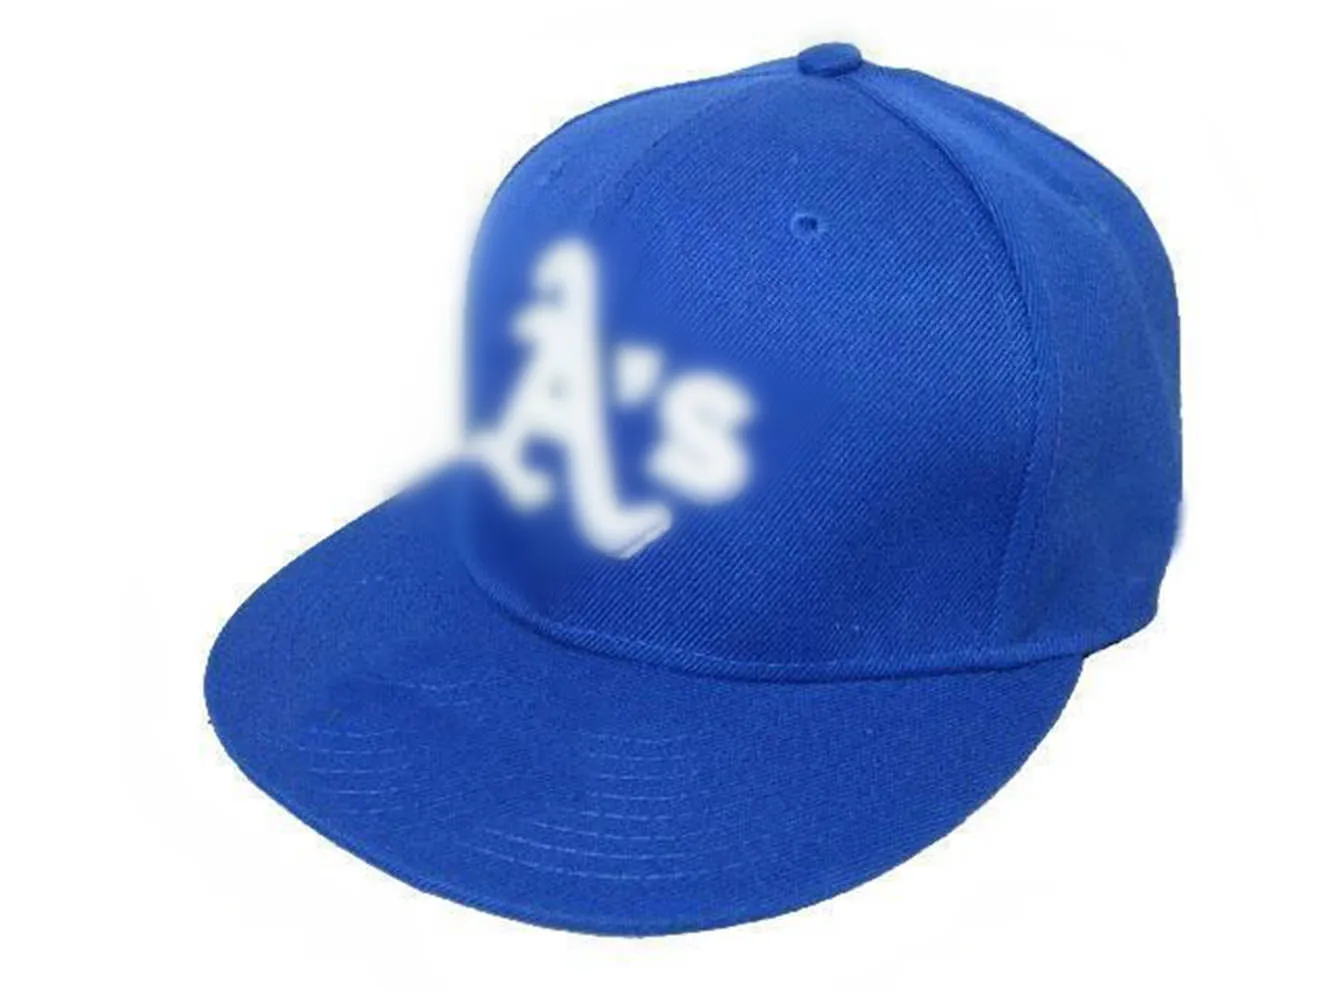 Unisex Fitted Baseball Caps In Various Colors, Casual Athletic Outdoor  Sports Hats, Breathable Cotton Material, H6 7.14 From Dugate12, $4.86